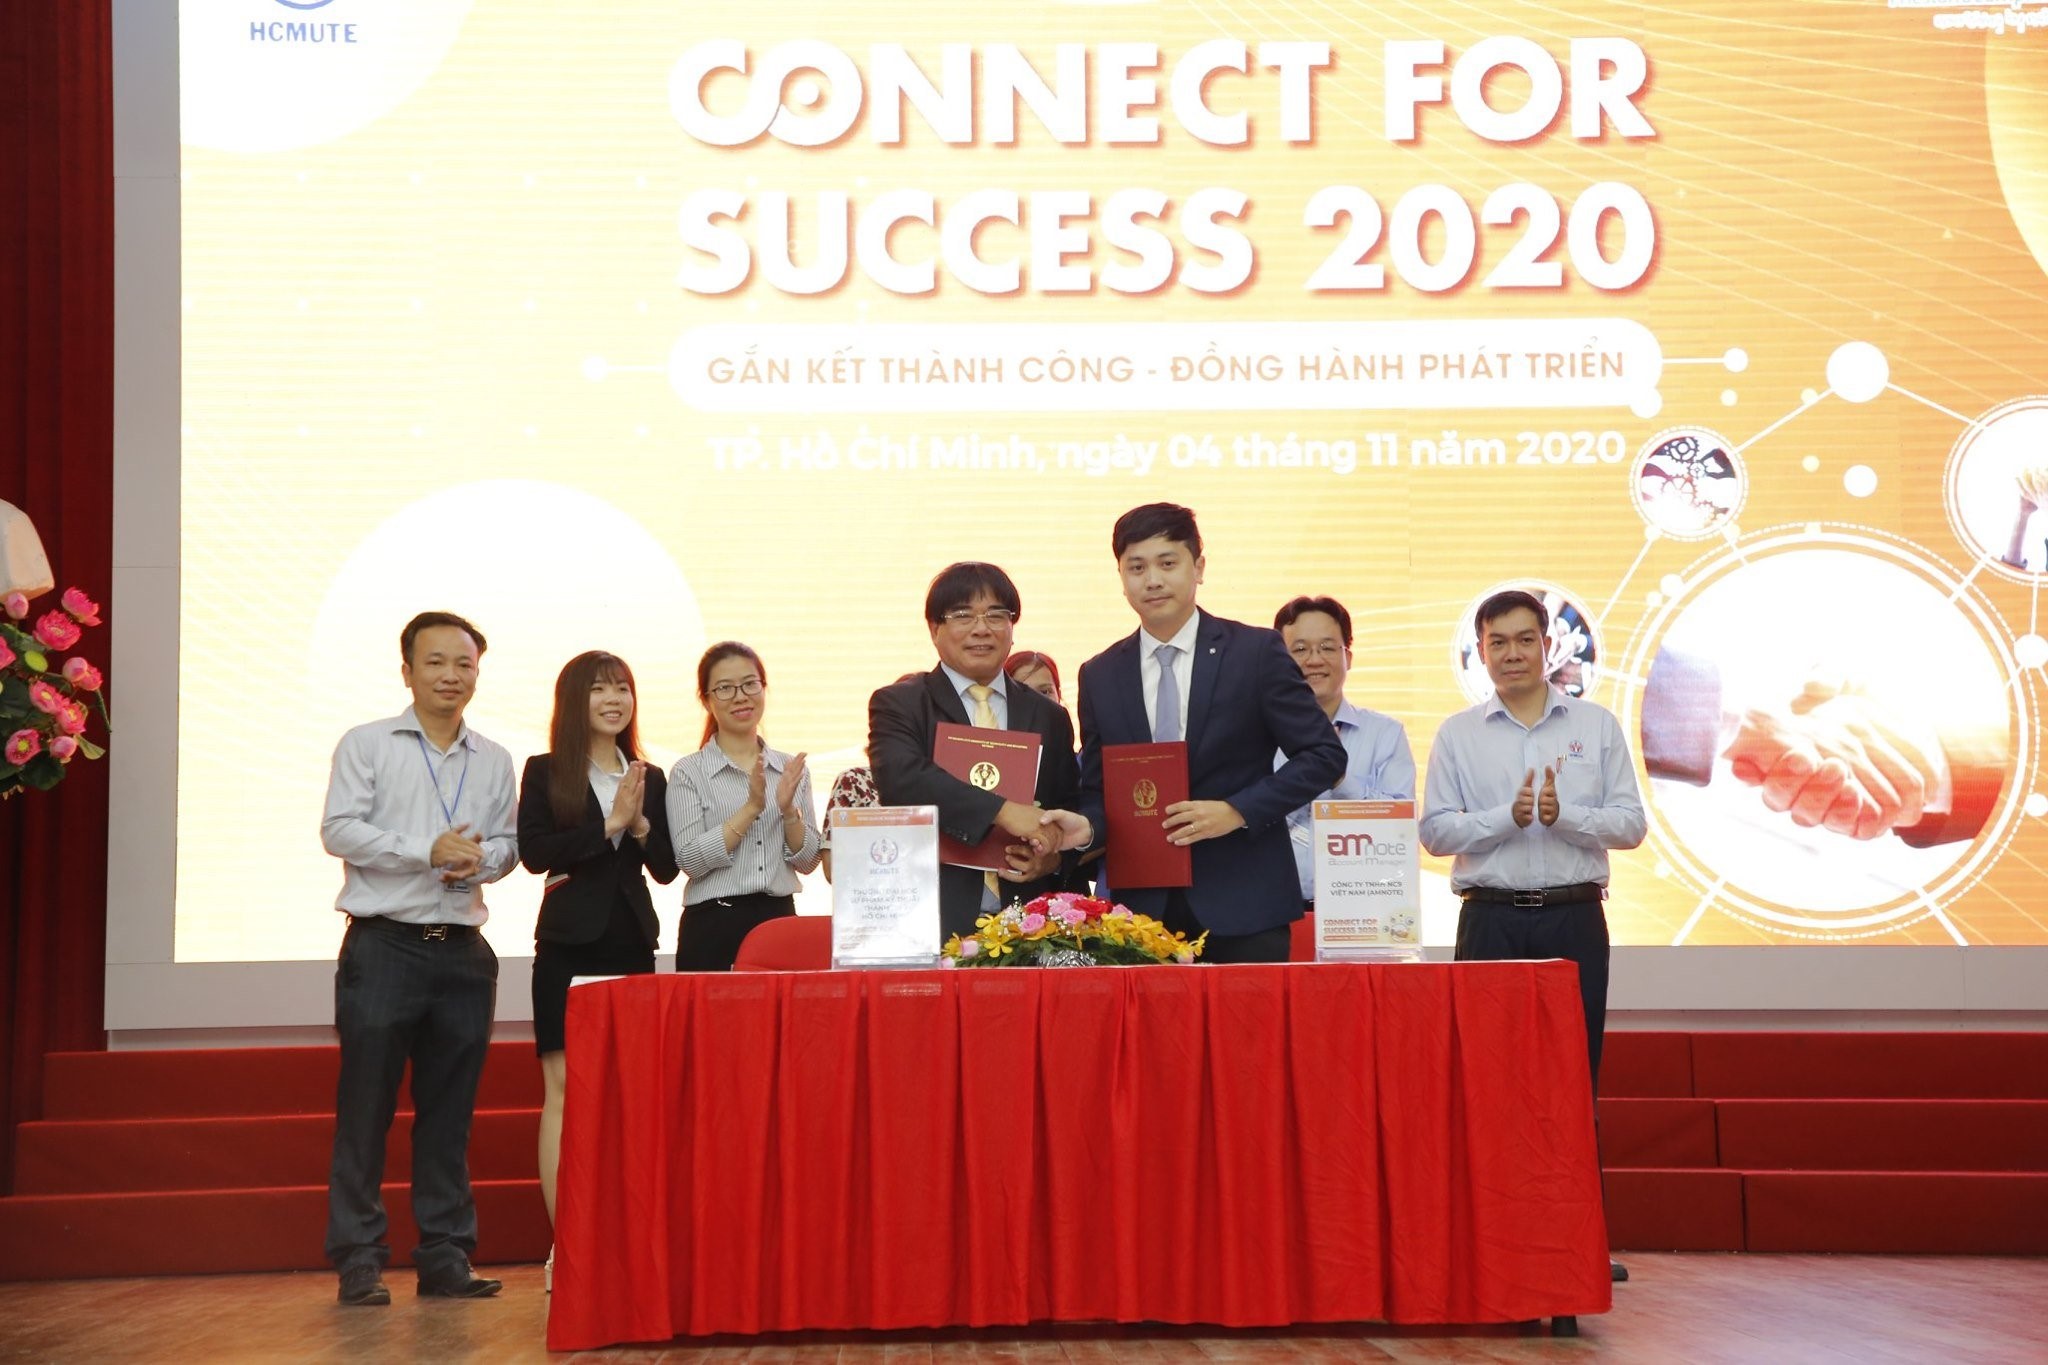 Associate Professor. Do Van Dung and Mr. Luc Quang Khanh - Representatives of the business have agreed on the terms of the training commitment, implementing the signing in the presence of officials from both sides and a large number of students of the university